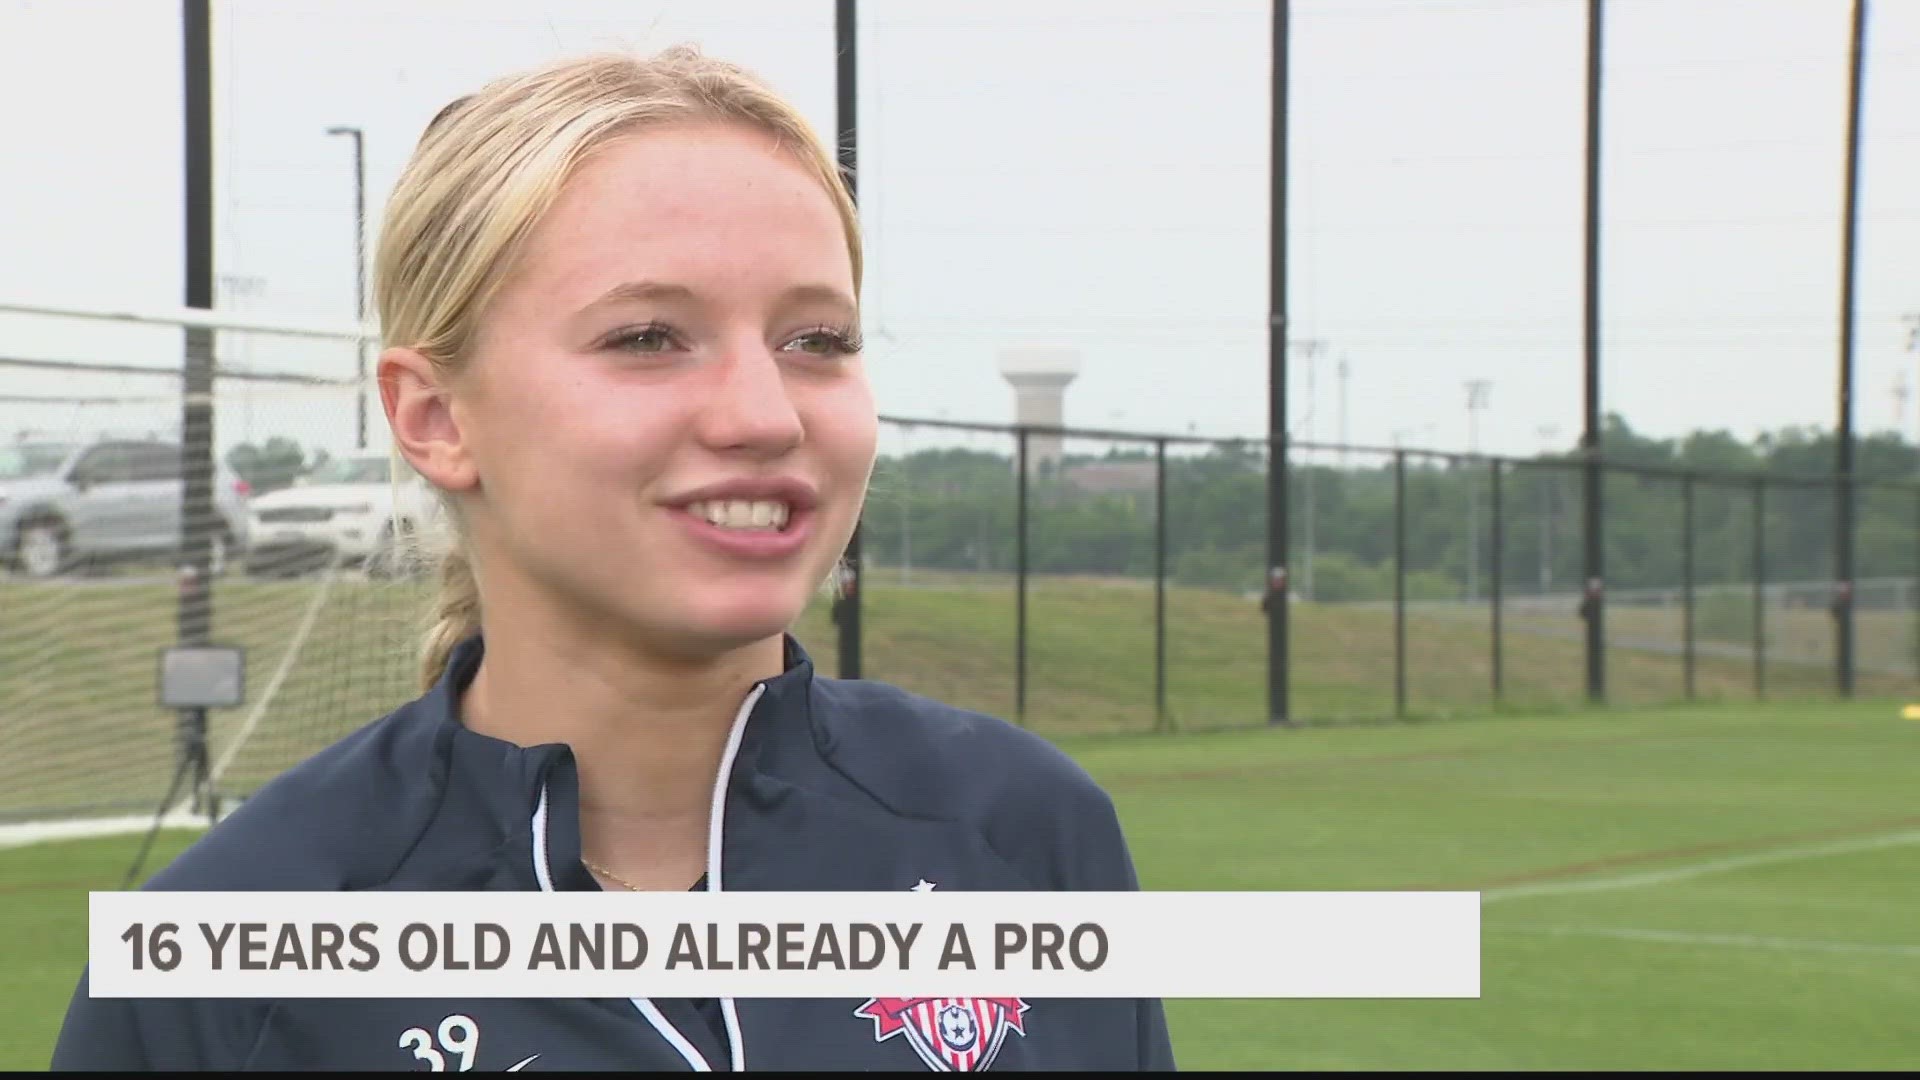 Chloe Ricketts, the Washington Spirit's 16-year-old soccer pro, talks to WUSA9 in this exclusive interview.